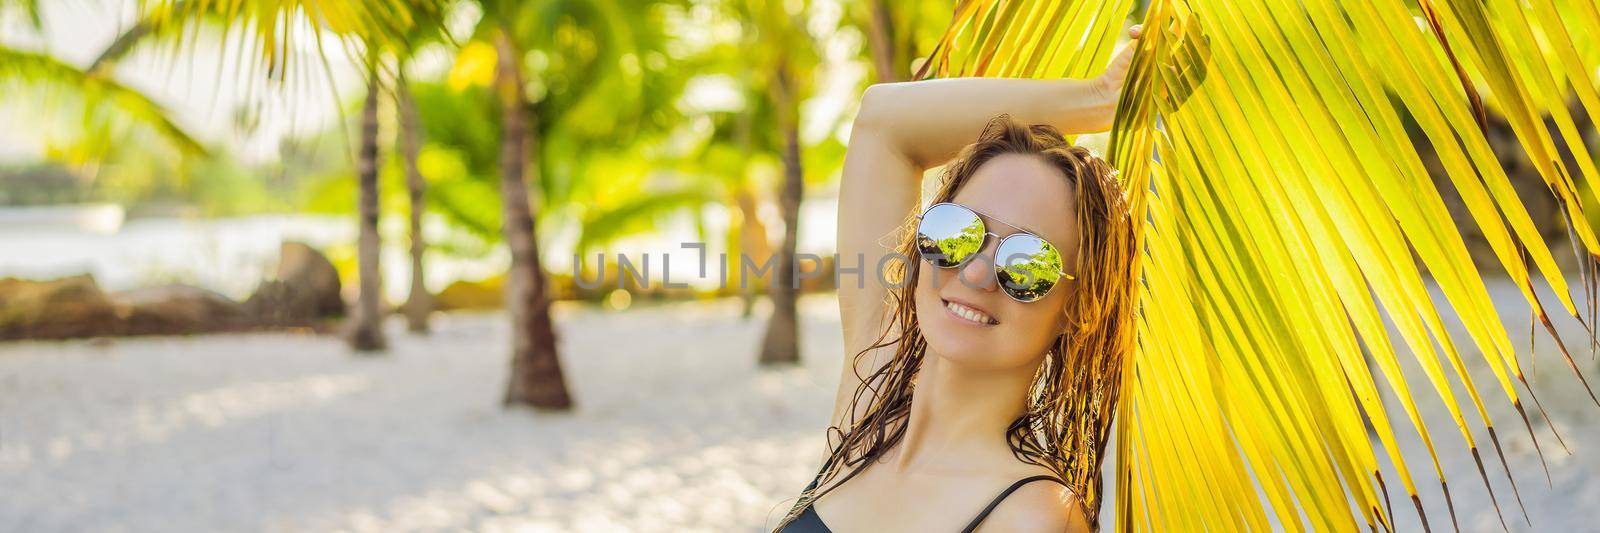 young beautiful woman in swimsuit on tropical beach, summer vacation, palm tree leaf, tanned skin, sand, smiling, happy. Happy traveller woman BANNER, LONG FORMAT by galitskaya